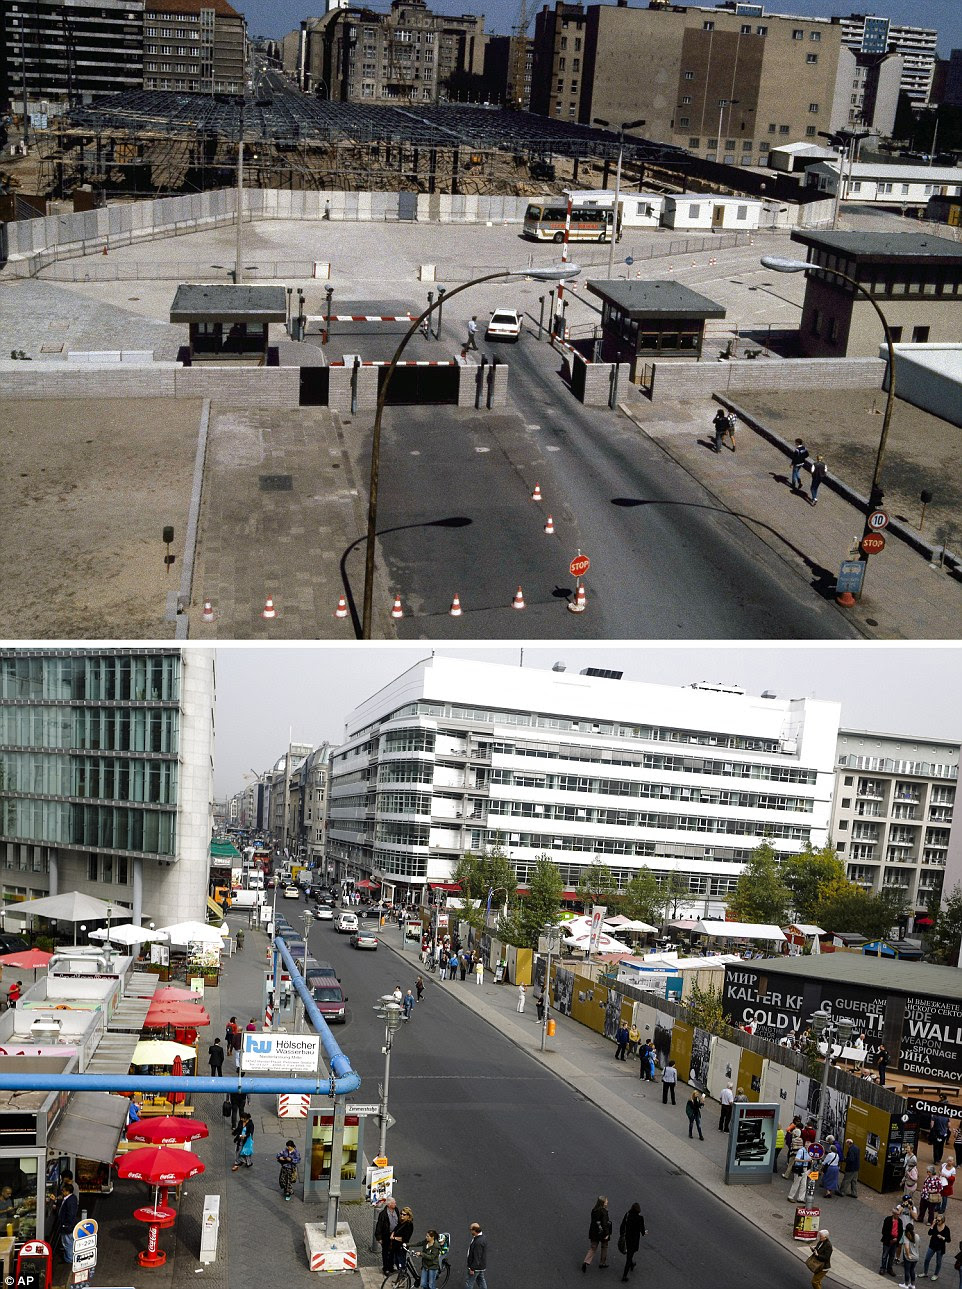 Construction work at the Berlin Wall on Aug. 13, 1985 on Friedrichstrasse near checkpoint Charlie and  Friedrichstrasse Oct. 2, 2014 - 25 years after the fall of the wall. (AP Photo/Markus Schreiber)